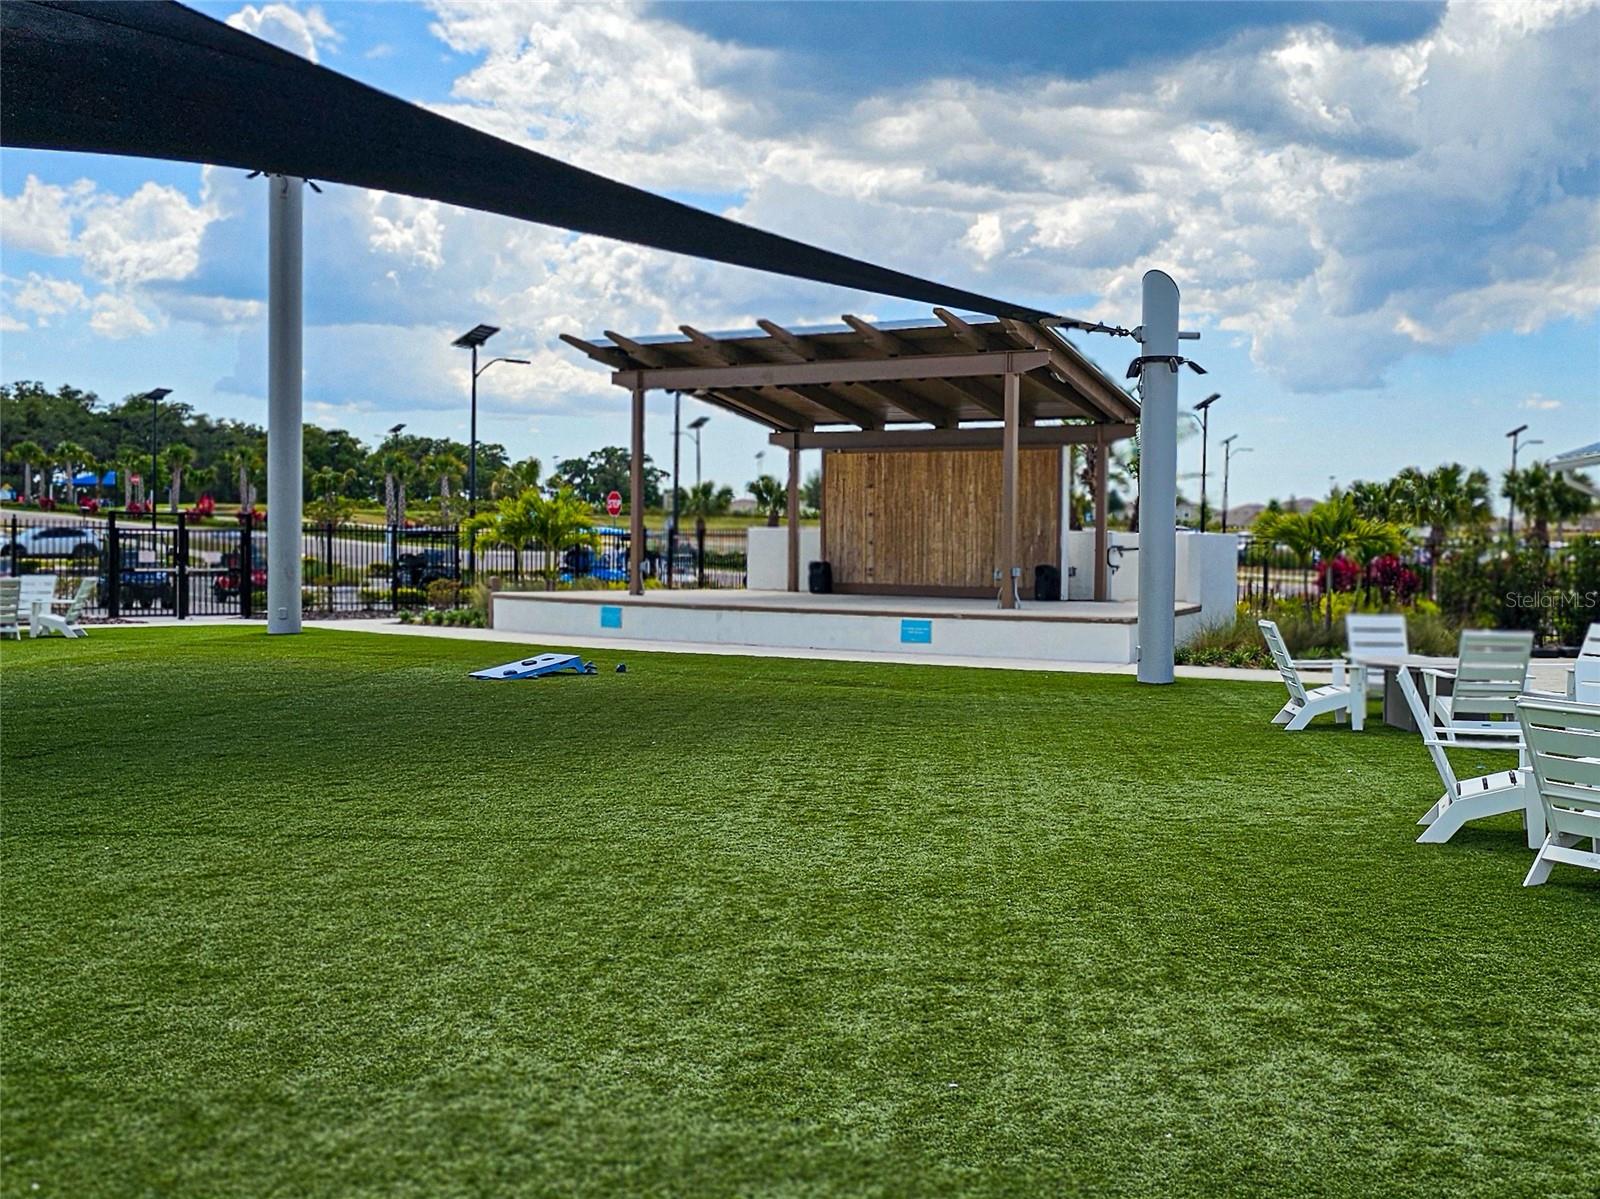 Grassy Area for Games and Extra Seating